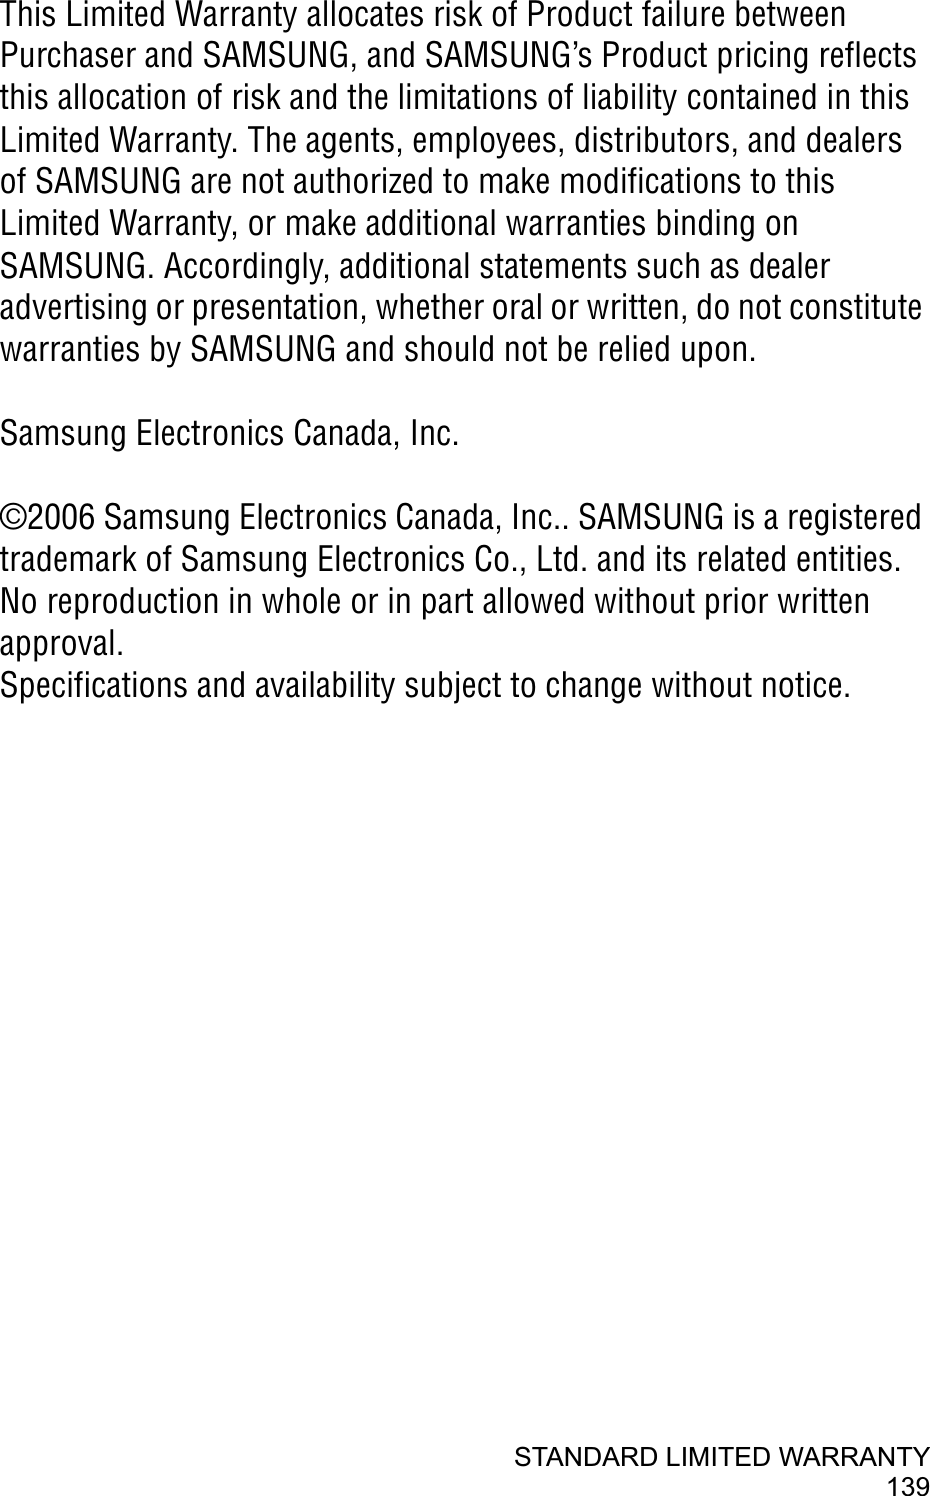 STANDARD LIMITED WARRANTY139This Limited Warranty allocates risk of Product failure between Purchaser and SAMSUNG, and SAMSUNG’s Product pricing reflects this allocation of risk and the limitations of liability contained in this Limited Warranty. The agents, employees, distributors, and dealers of SAMSUNG are not authorized to make modifications to this Limited Warranty, or make additional warranties binding on SAMSUNG. Accordingly, additional statements such as dealer advertising or presentation, whether oral or written, do not constitute warranties by SAMSUNG and should not be relied upon.Samsung Electronics Canada, Inc. ©2006 Samsung Electronics Canada, Inc.. SAMSUNG is a registered trademark of Samsung Electronics Co., Ltd. and its related entities.No reproduction in whole or in part allowed without prior written approval.Specifications and availability subject to change without notice. 